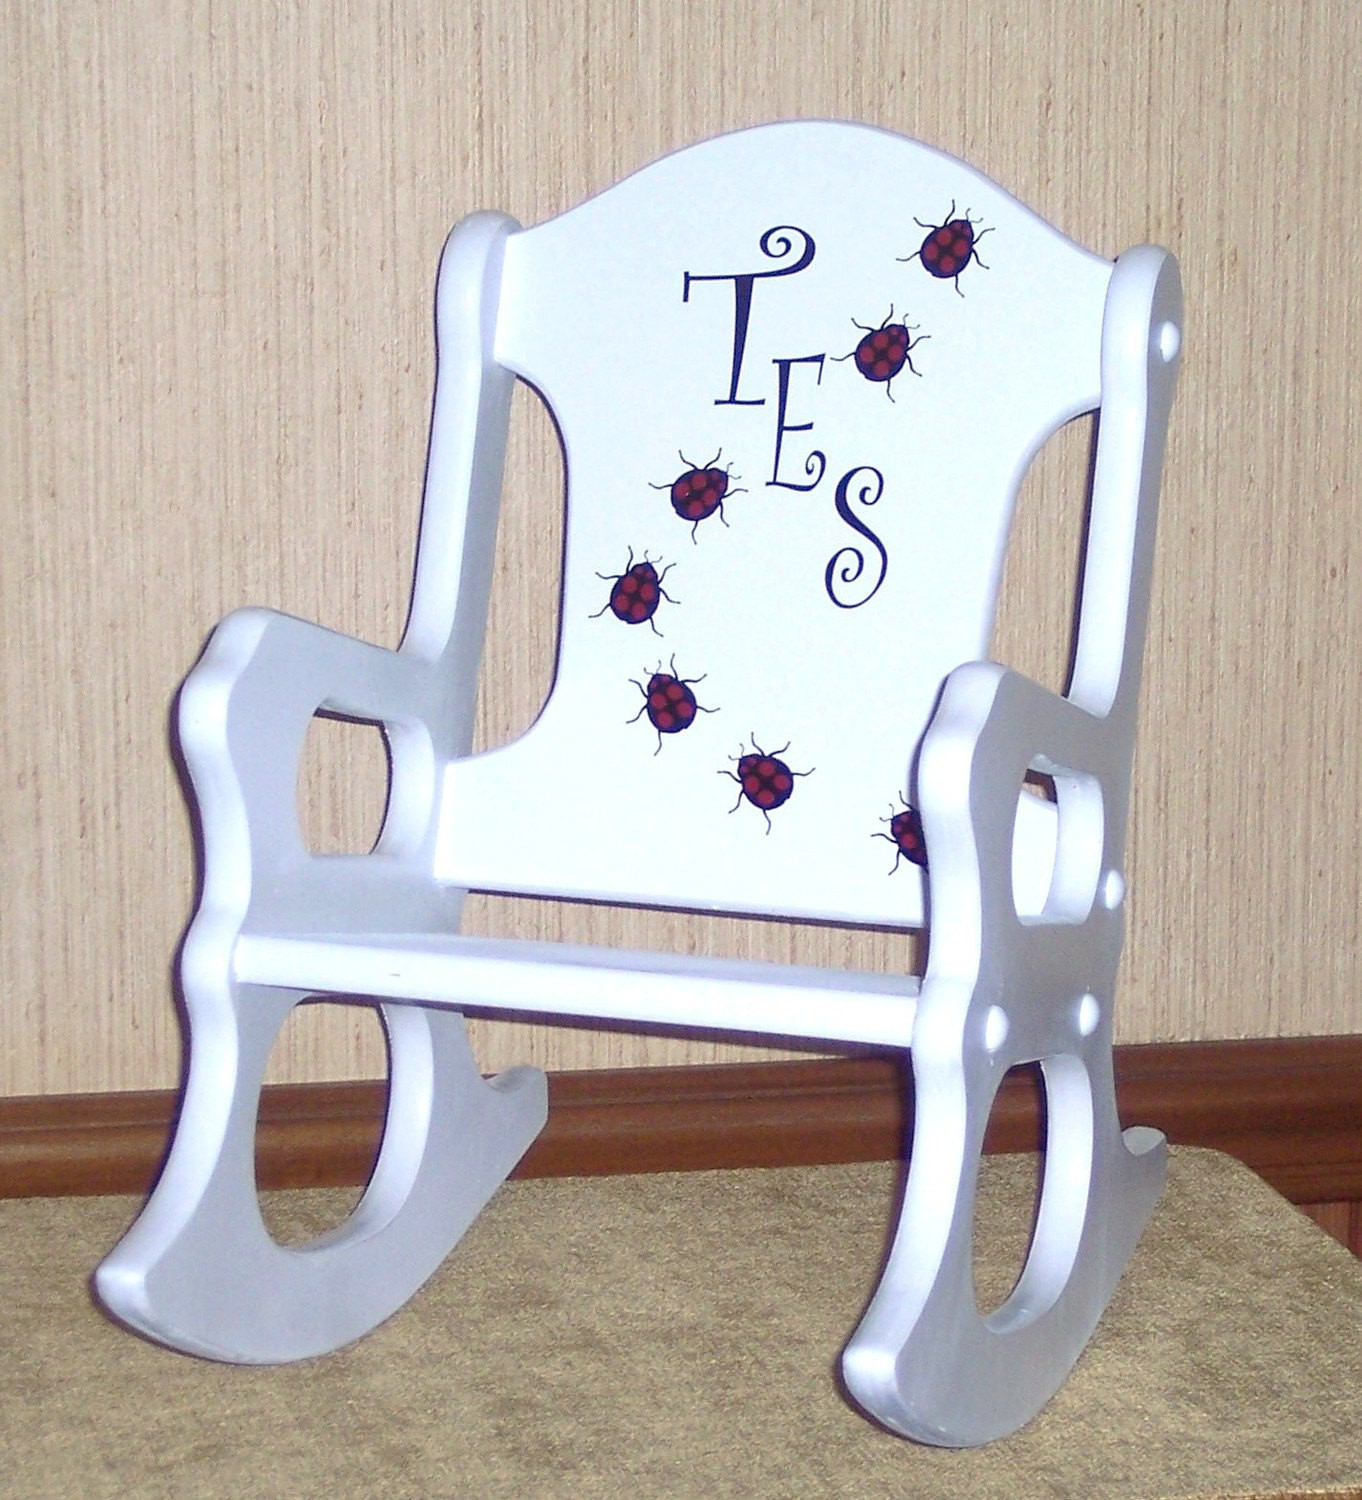 Personalized Kids Rocking Chair
 folding chair